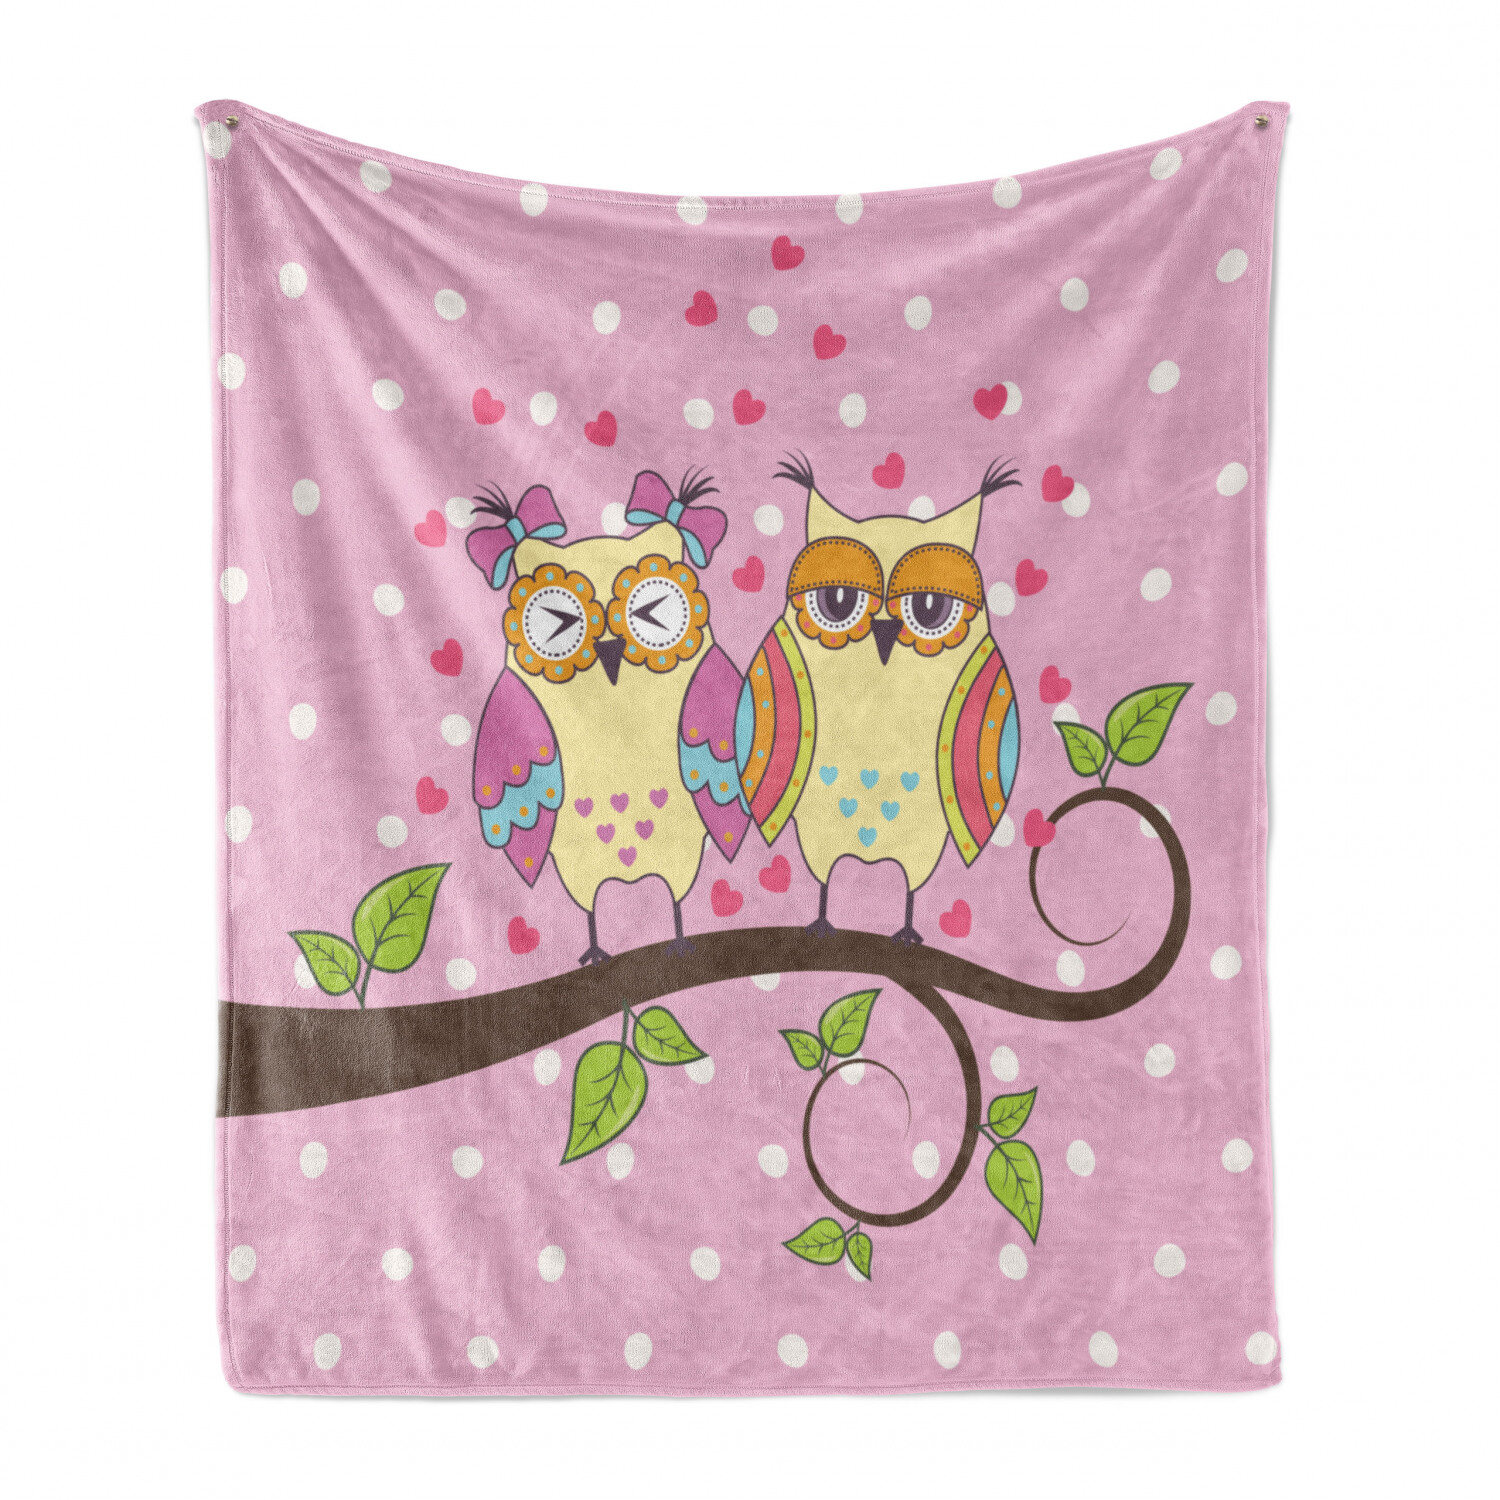 Funy Decor Flannel Blanket Owl Hanf Draw Soft Breathable Throw Blankets Cozy Bedspread for Home Couch Chair Bedroom All Seasons Use 50x60inch 